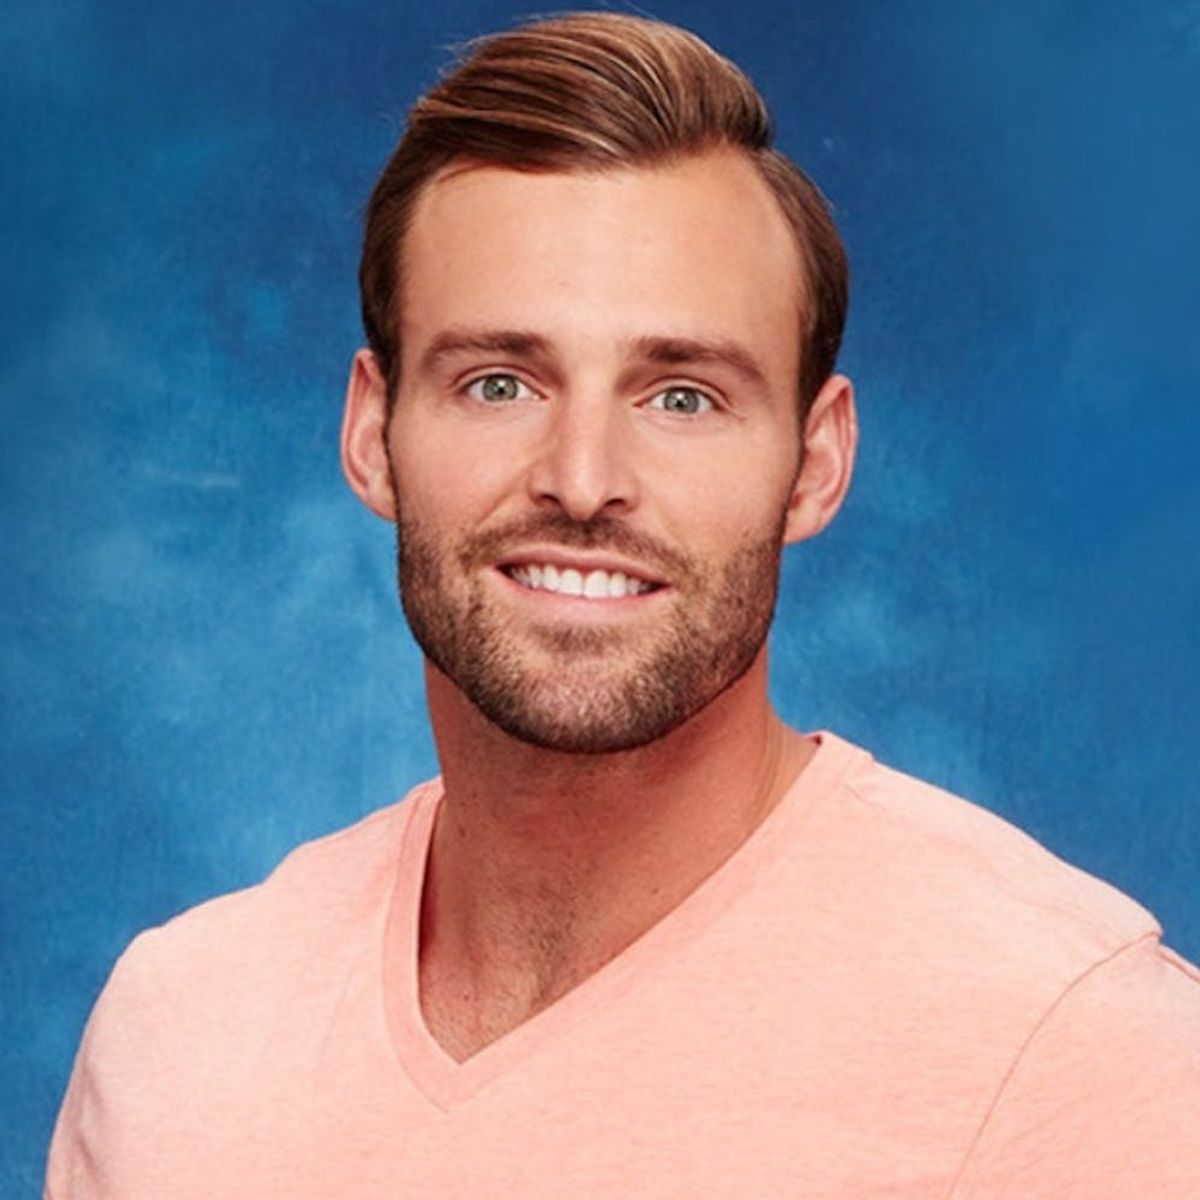 This Secret Theory About Why Robby Went on The Bachelorette Includes… a Bumpit